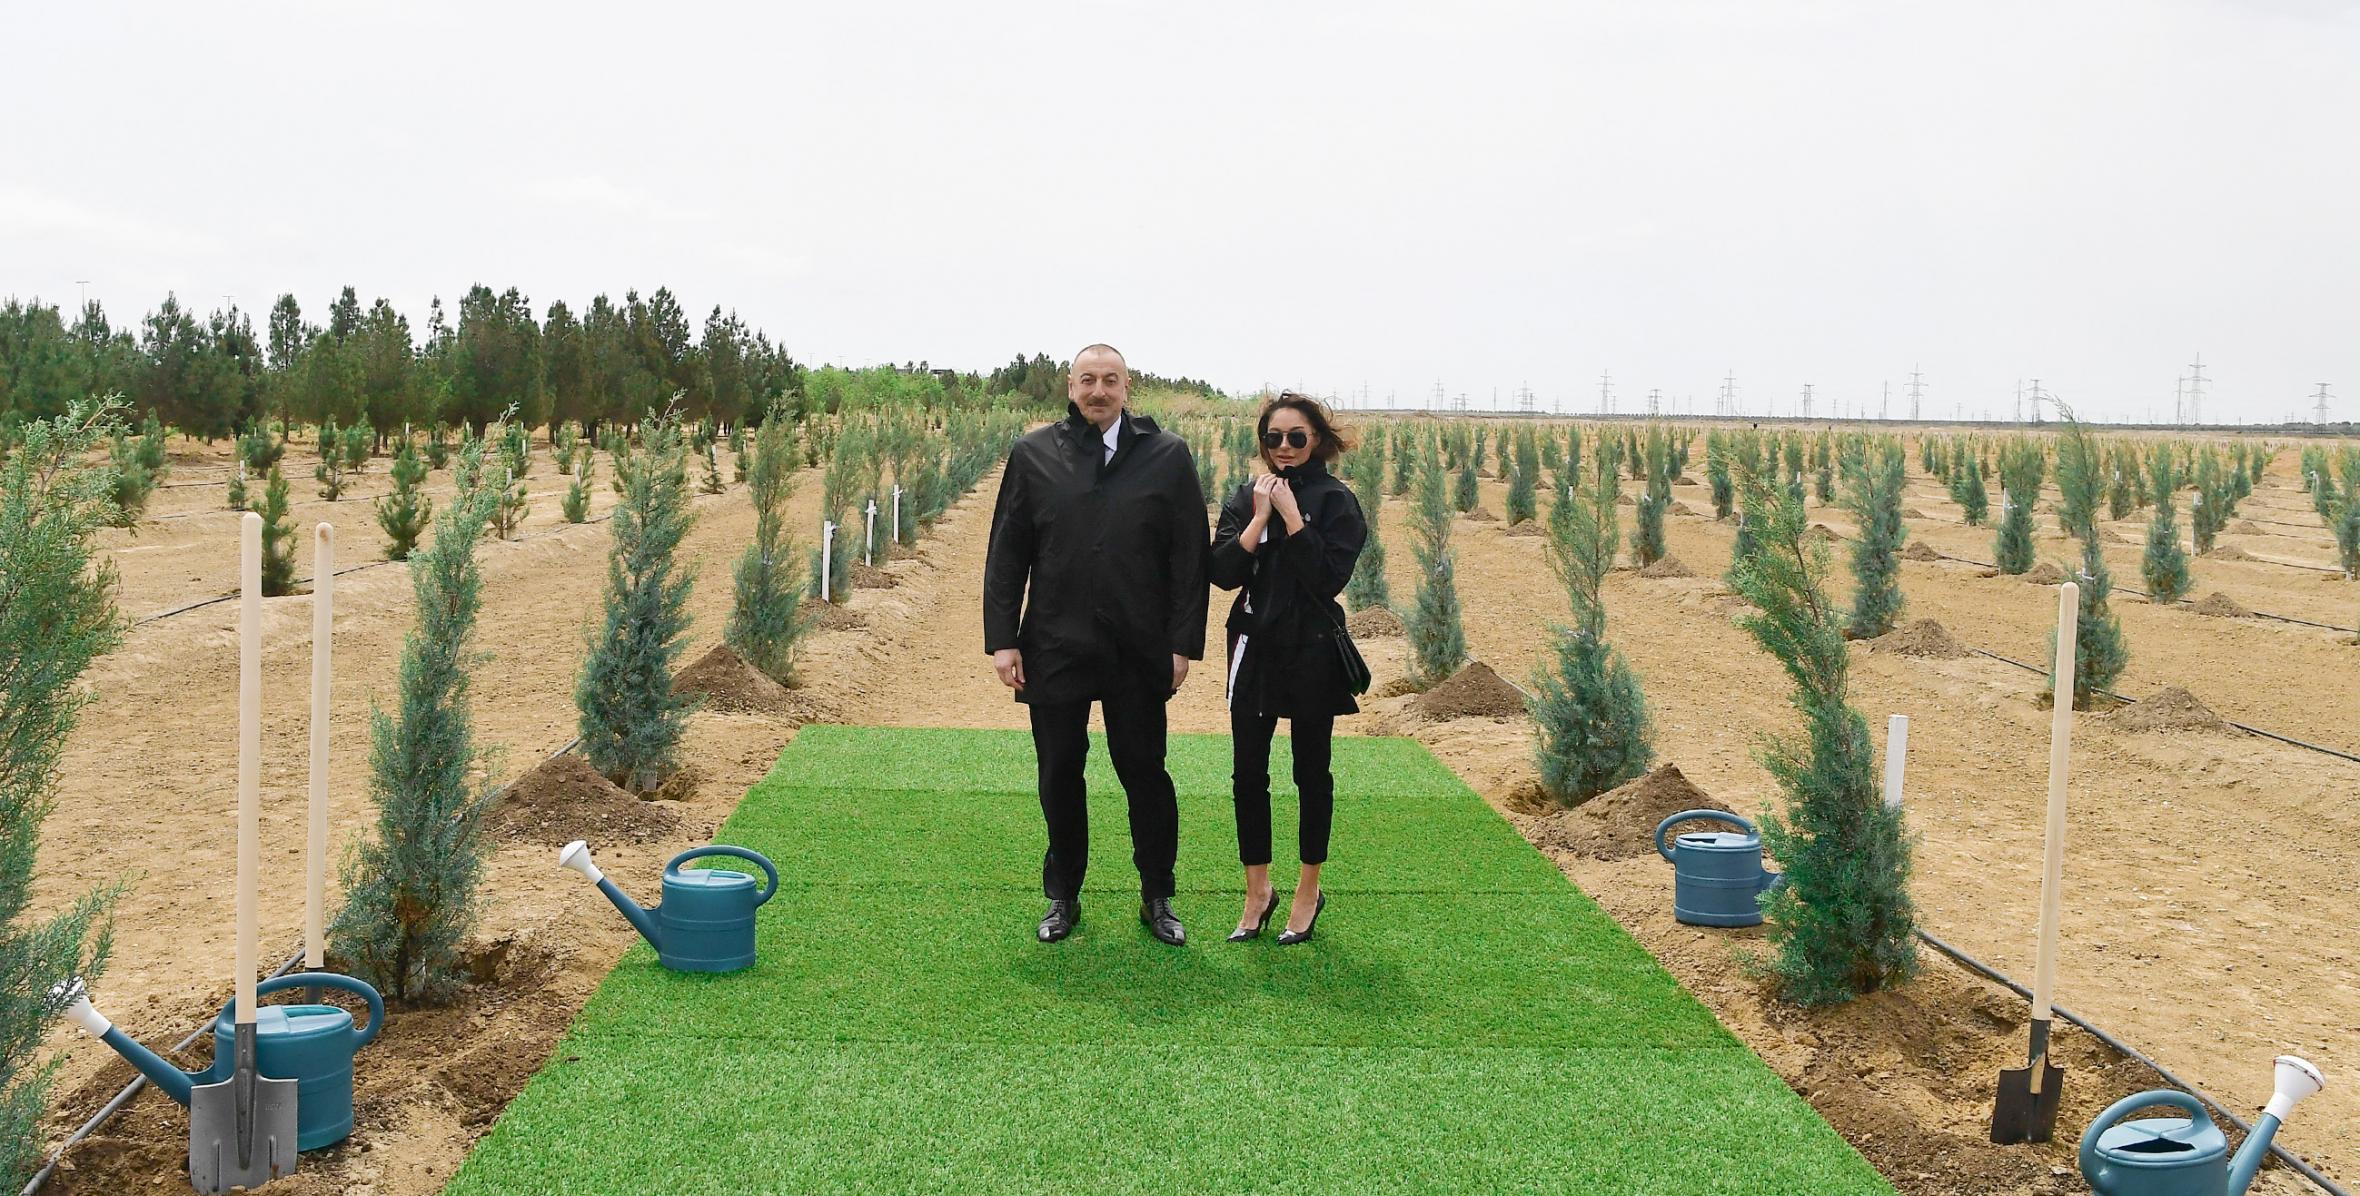 Ilham Aliyev and first lady Mehriban Aliyeva planted trees on the occasion of national leader Heydar Aliyev’s birth anniversary